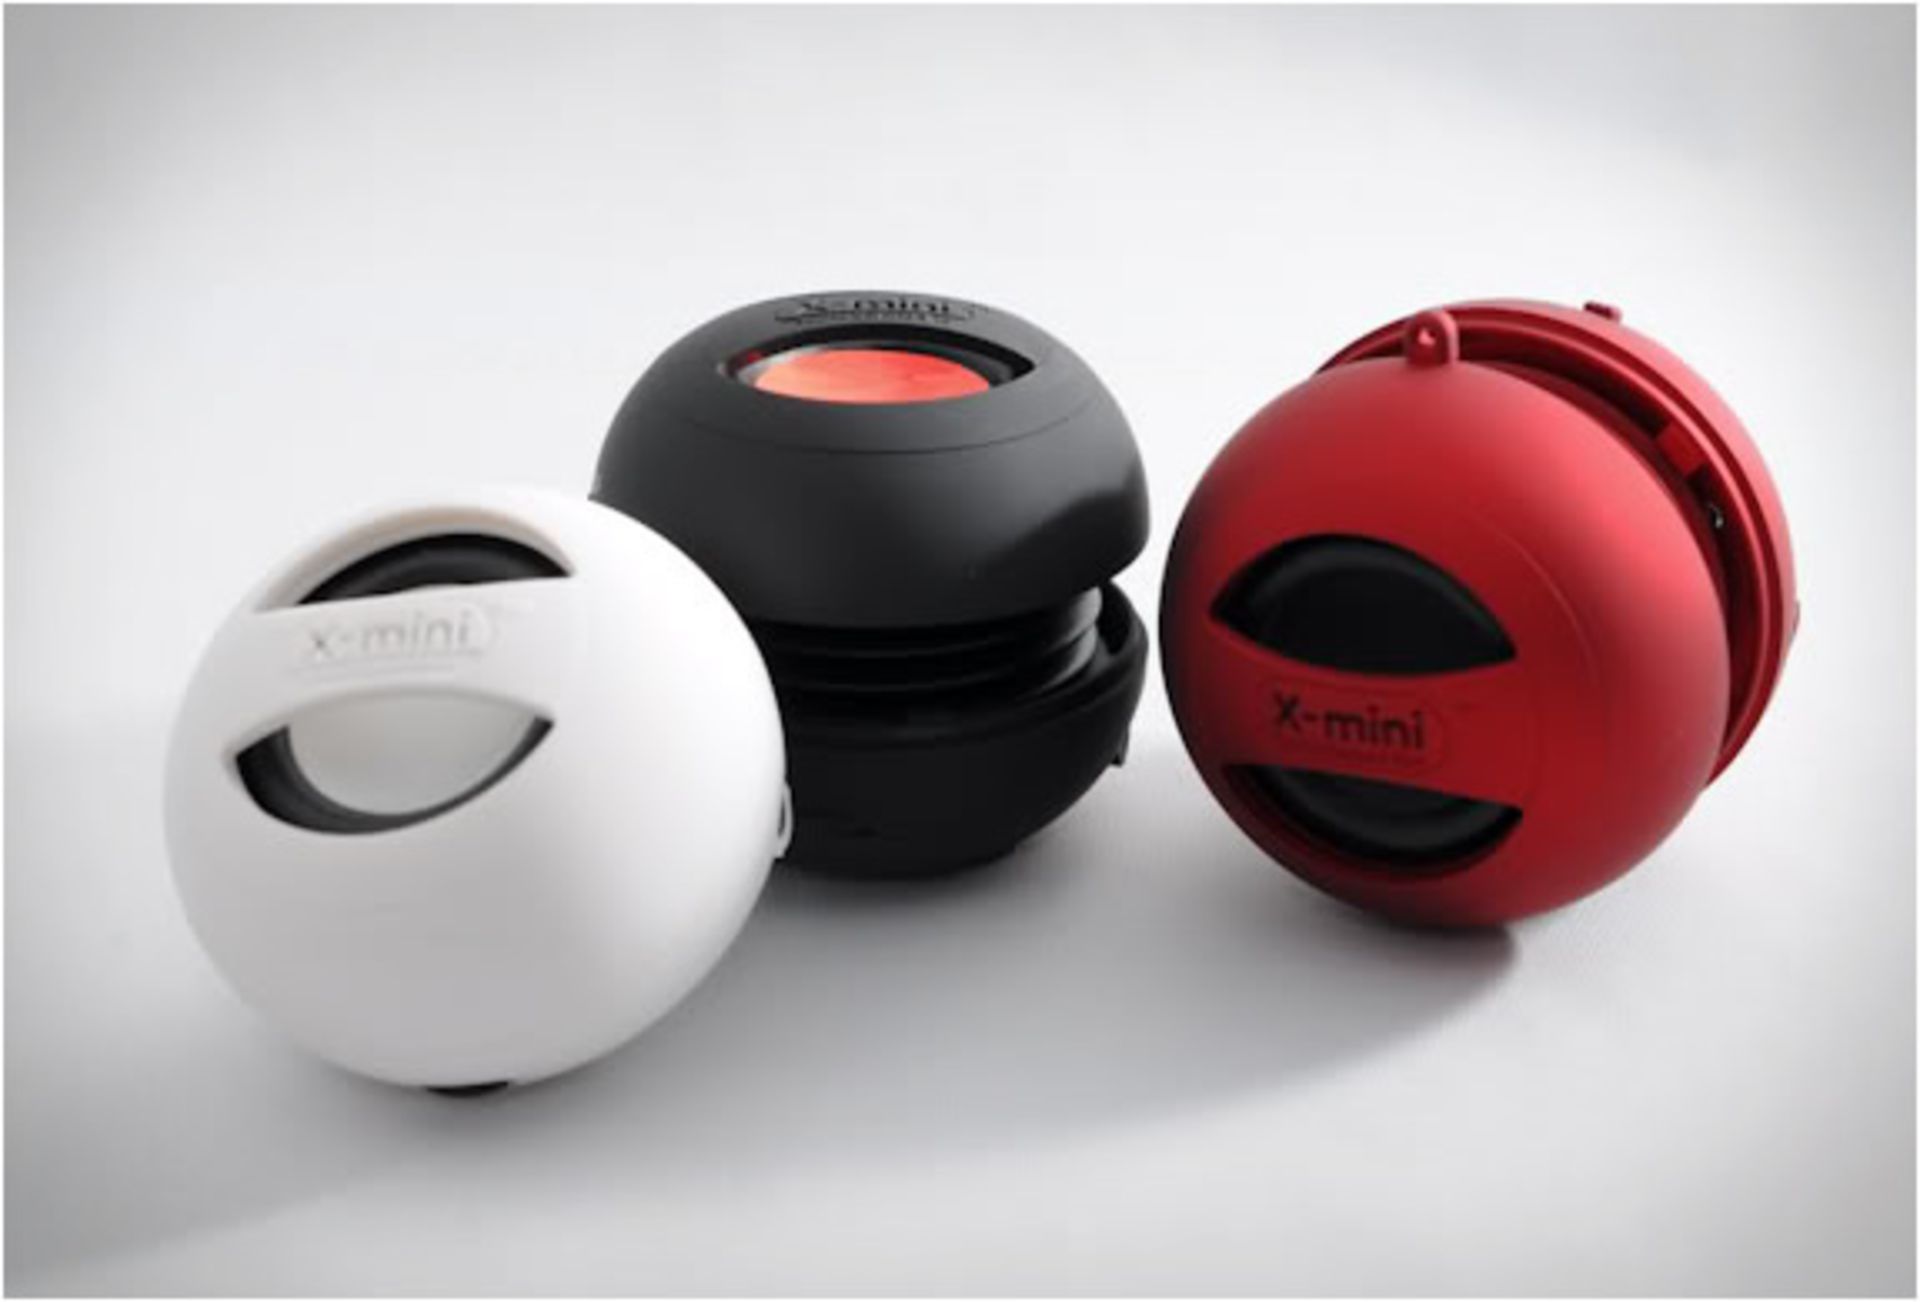 Brand New X-Mini Portable Capsule Speaker With Cables X 4 Bid price to be multiplied by Four